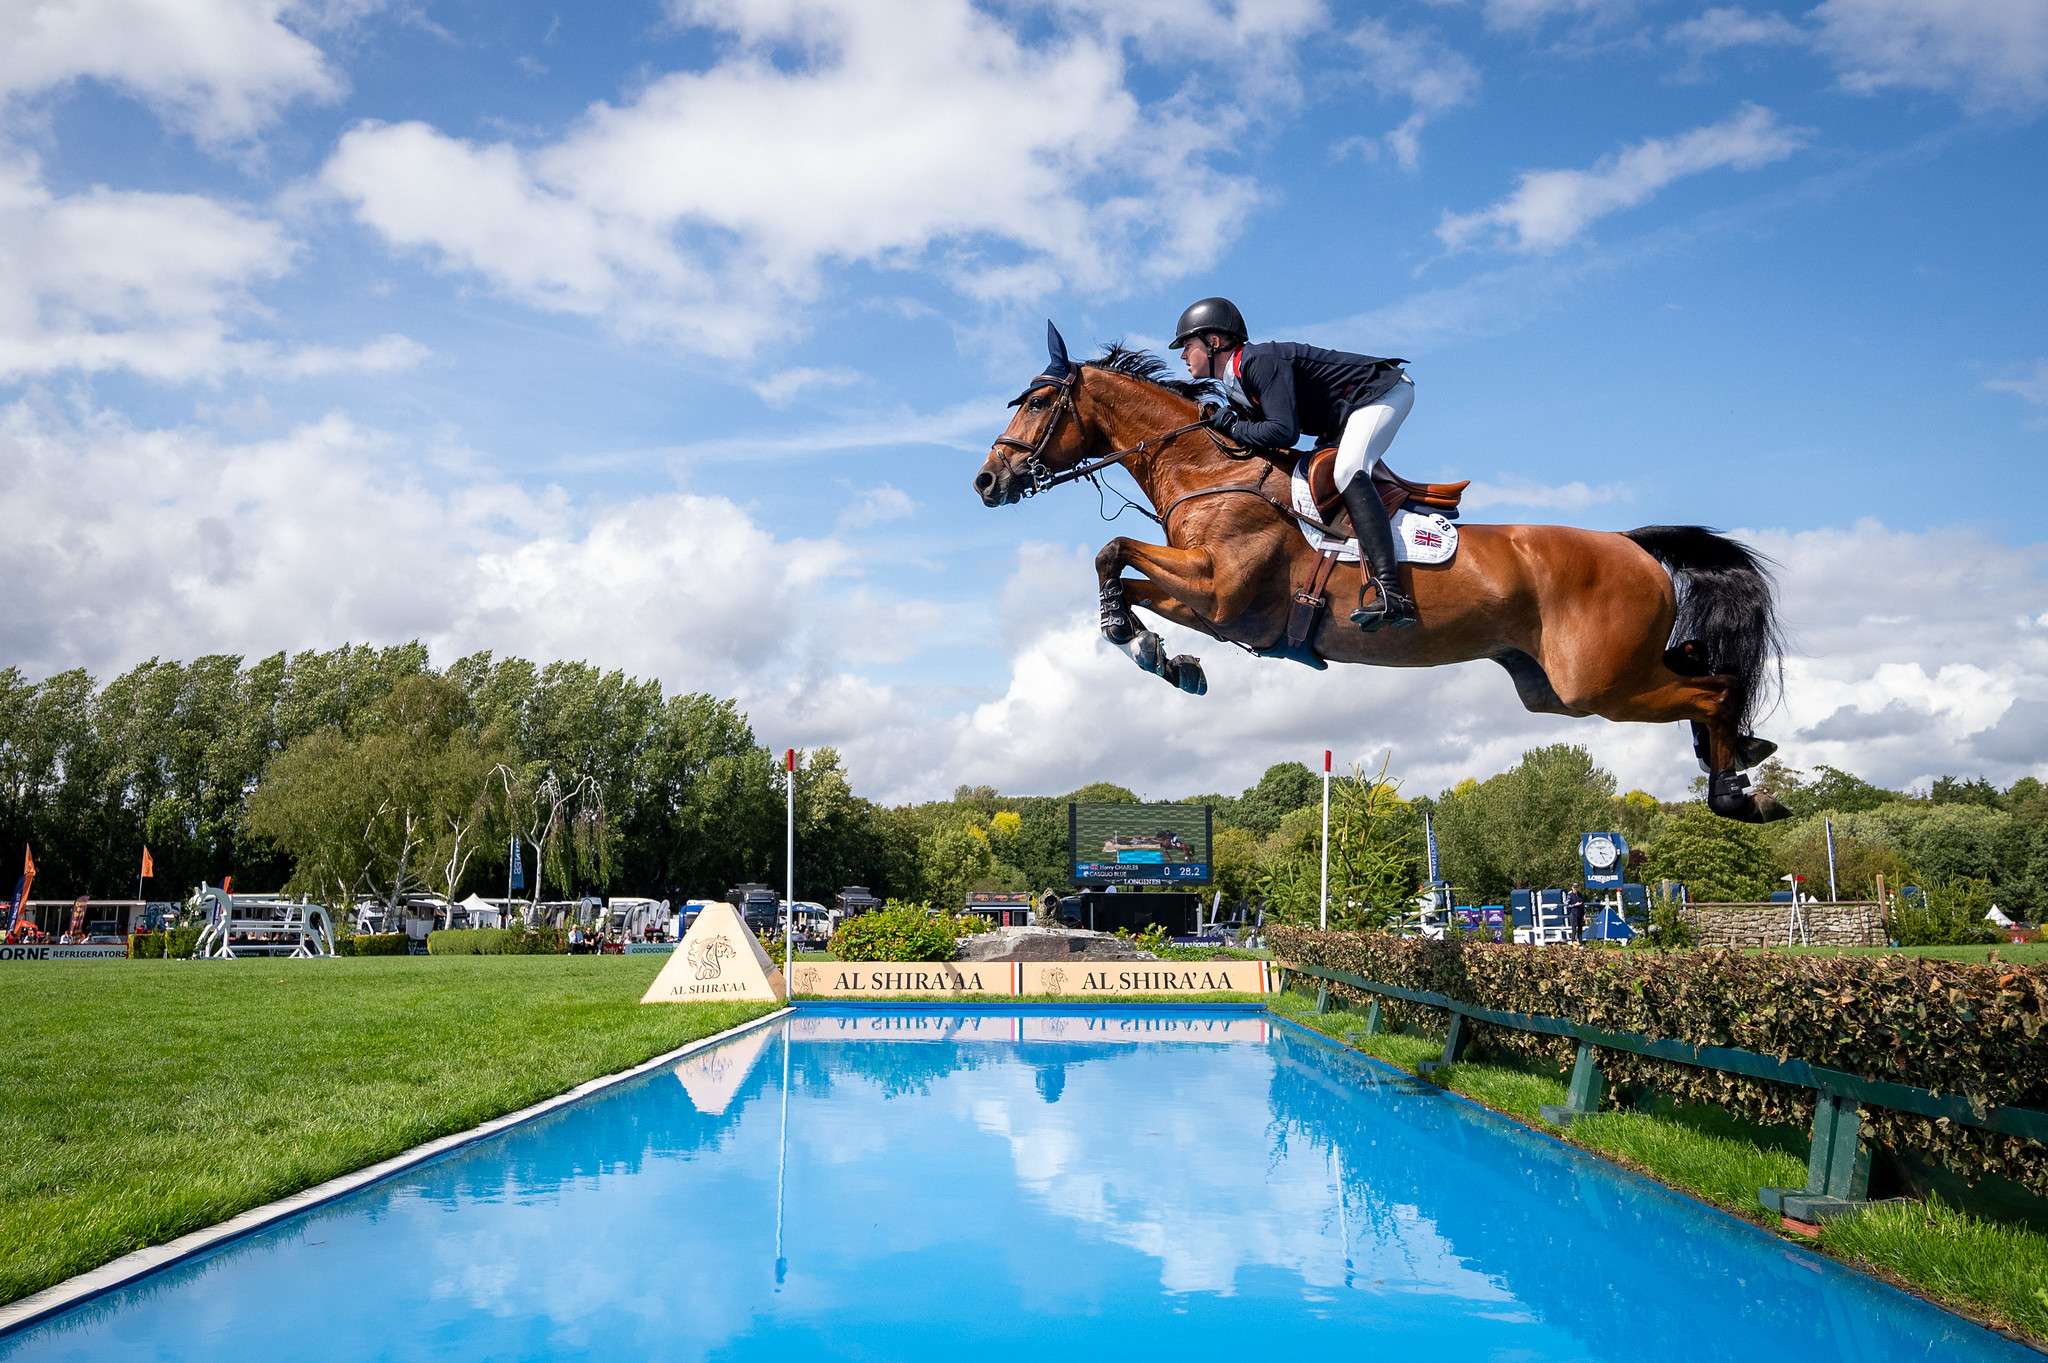 Harry CHARLES (GBR) & CASQUO BLUE compete in the LONGINES FEI Jumping Nations Cupâ¢ of Great Britain - Longines Royal International Horse Show - Hickstead, West Sussex, United Kingdom - 28 July 2023. Copyright © FEI/Jon Stroud